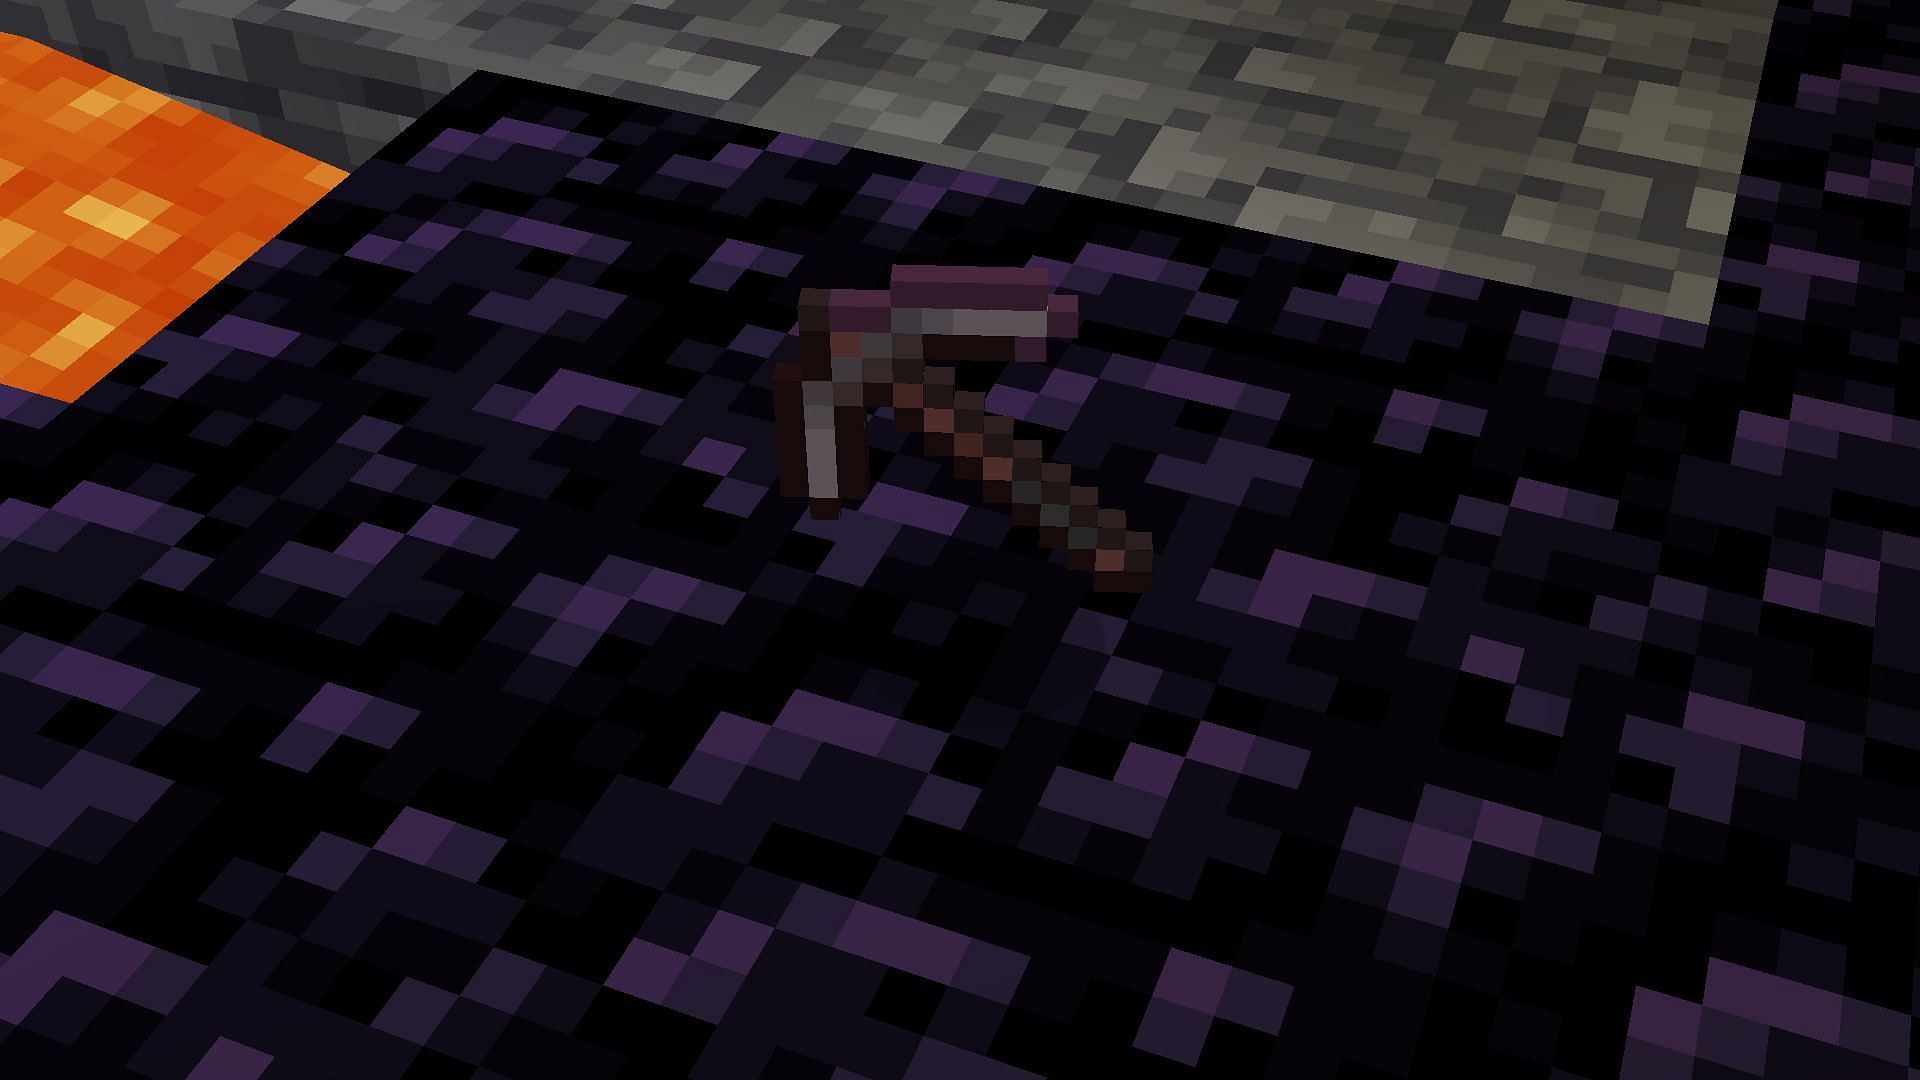 Netherite pickaxe in Minecraft is the second fastest but can mine all kinds of blocks (Image via Mojang)